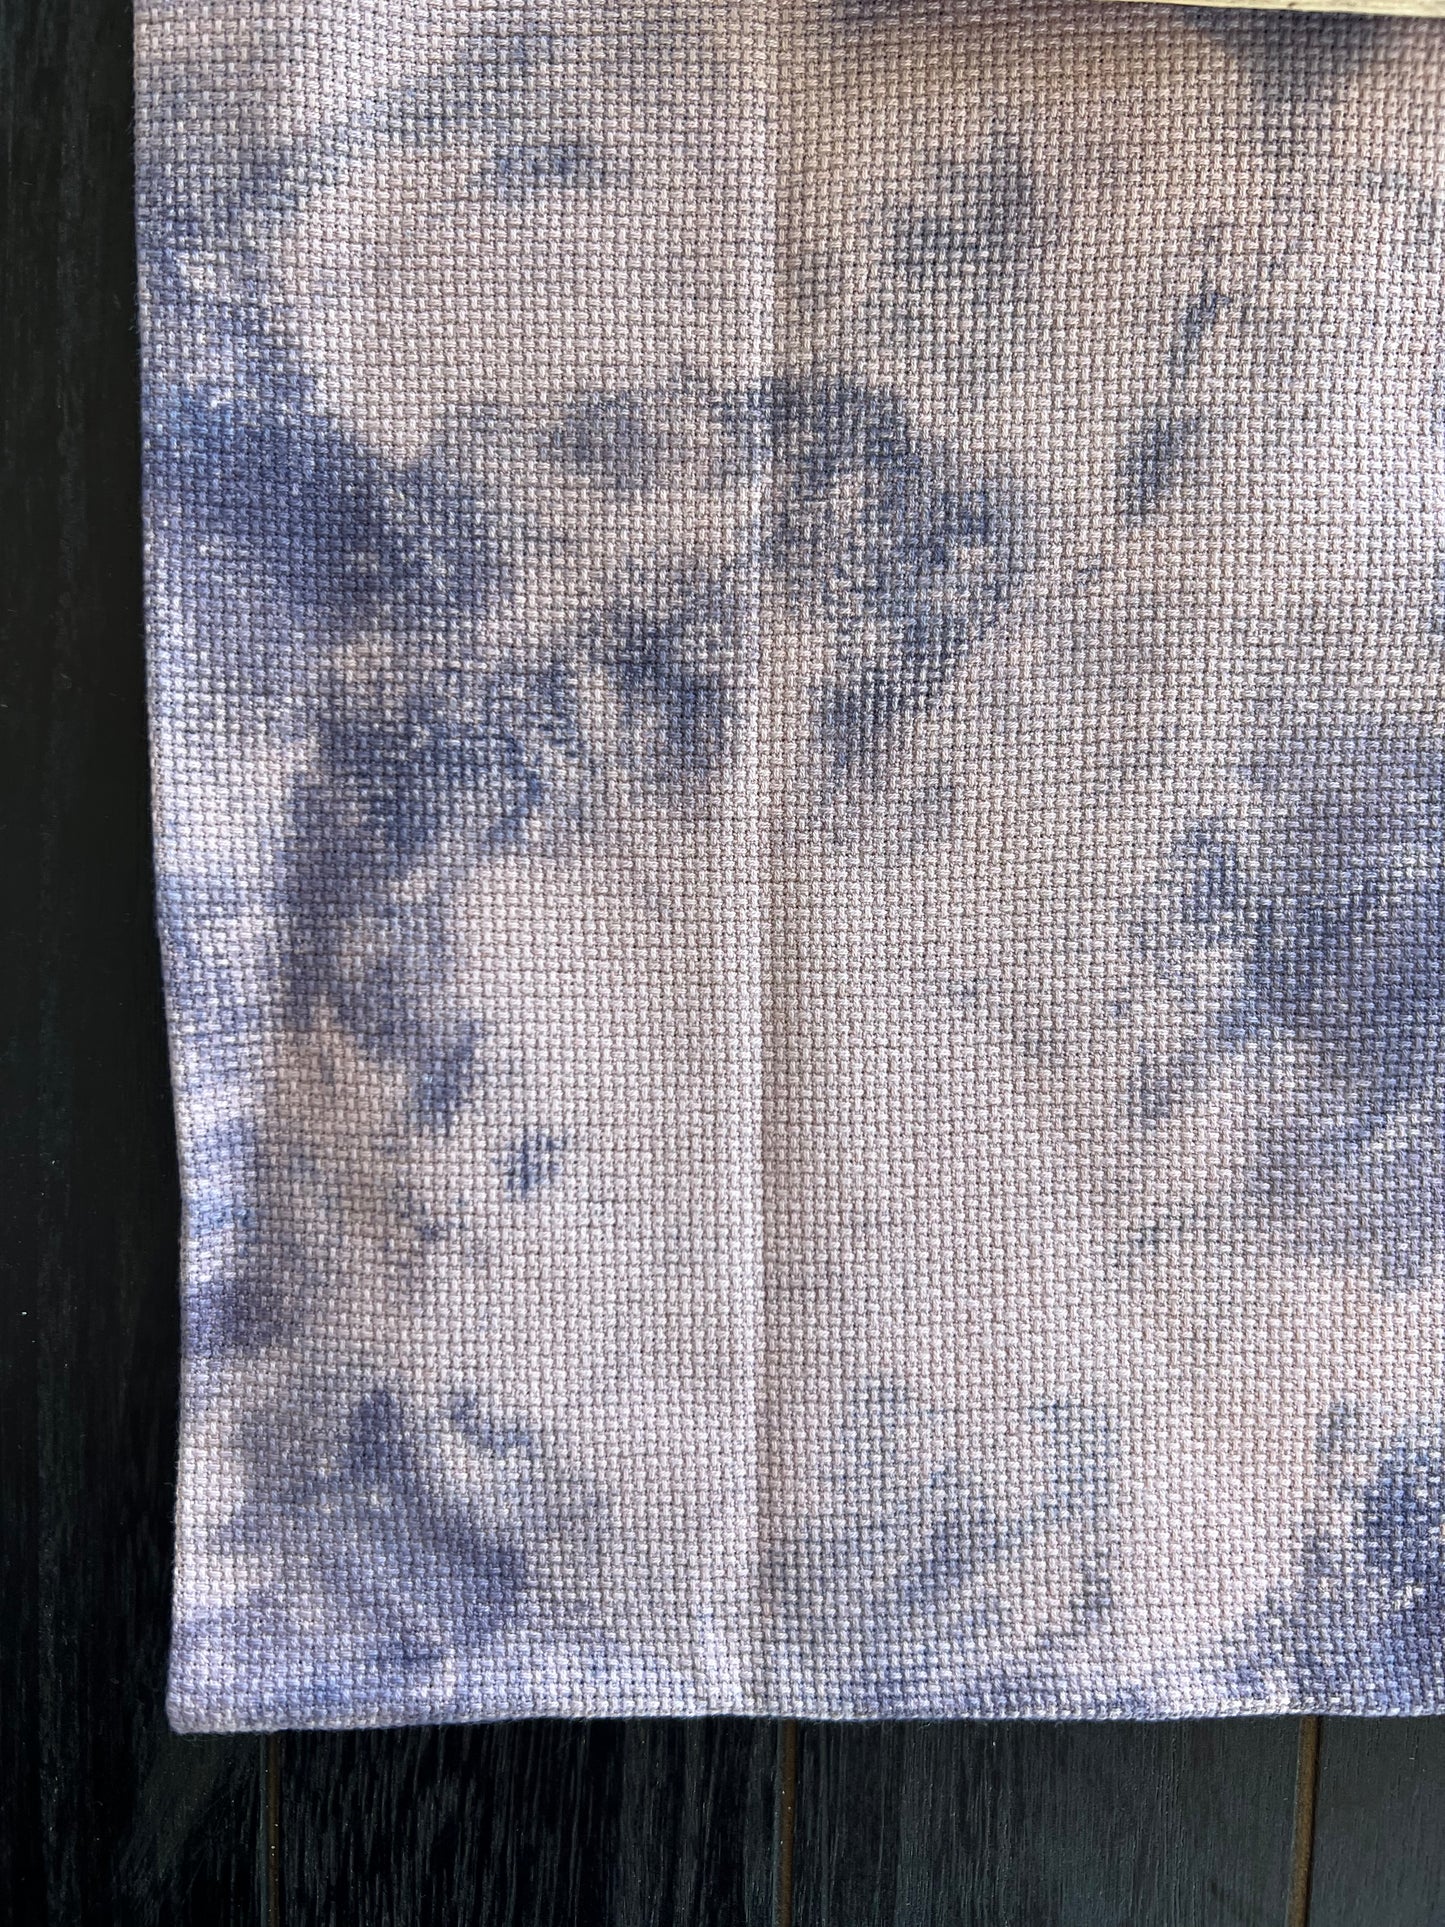 14 Count Aida 'Blueberry Stain' Hand Dyed Cross Stitch Fabric